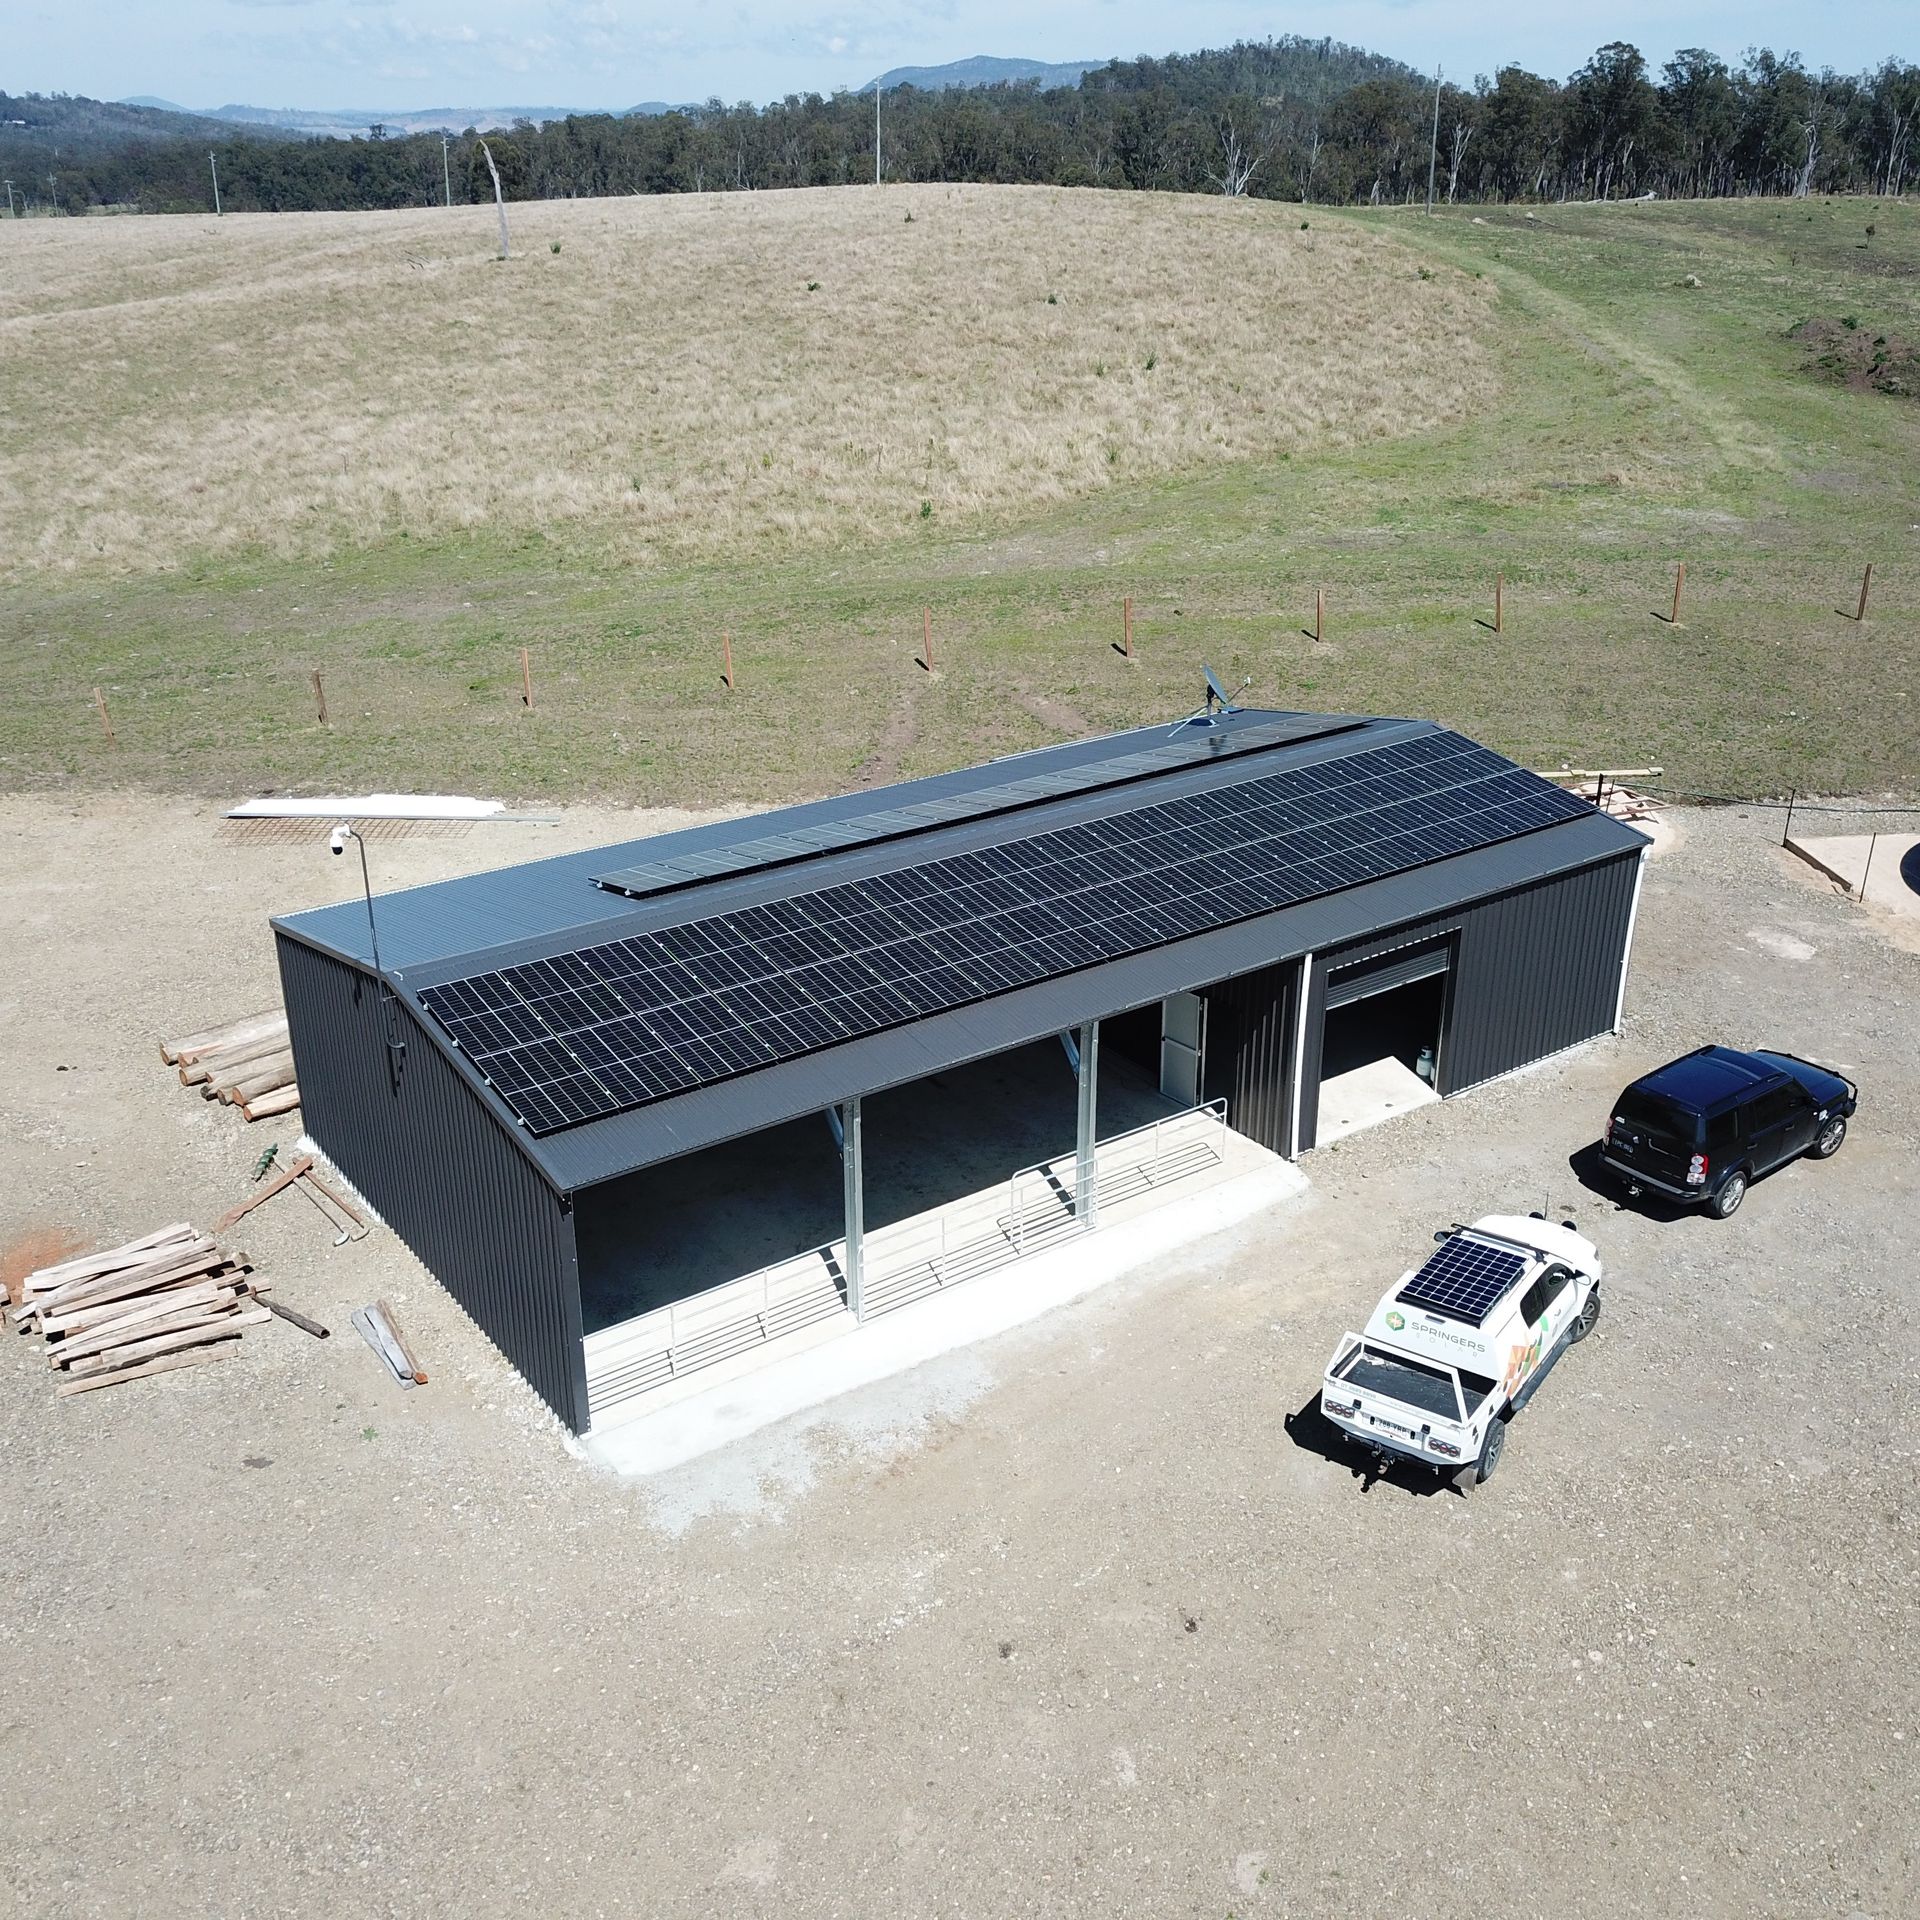 Off-Grid Home at Somerset